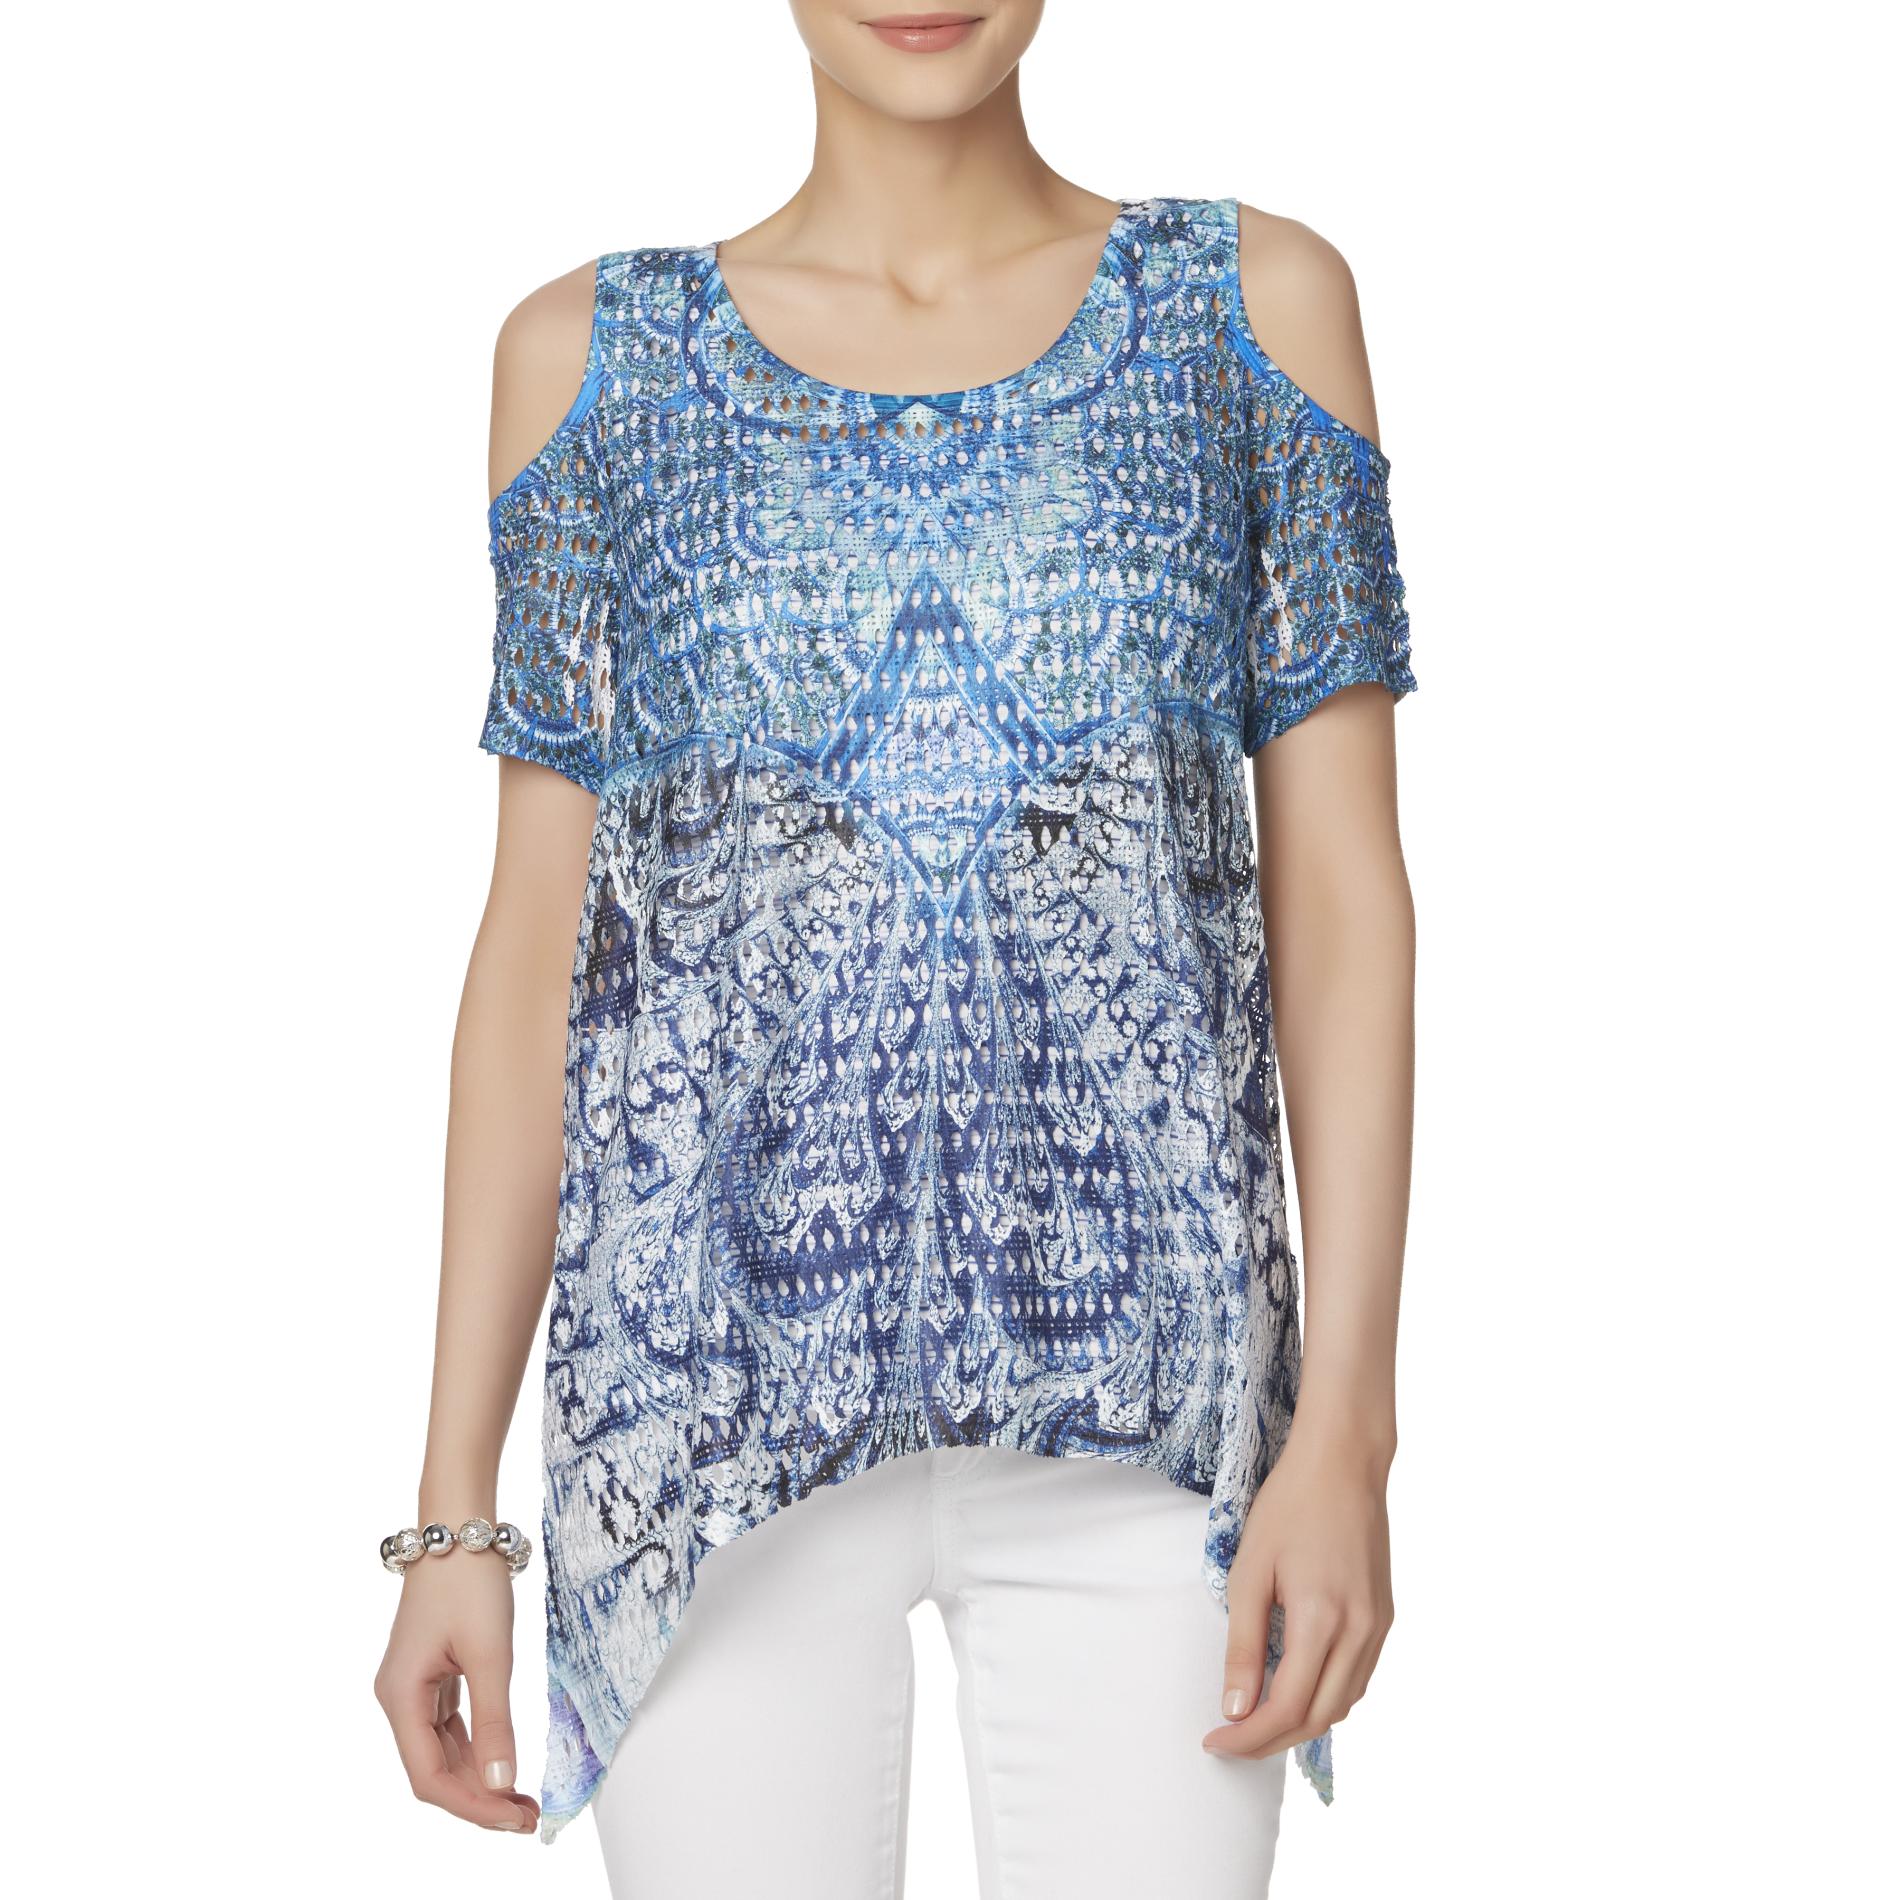 Simply Styled Women's Cold Shoulder Top - Abstract Print